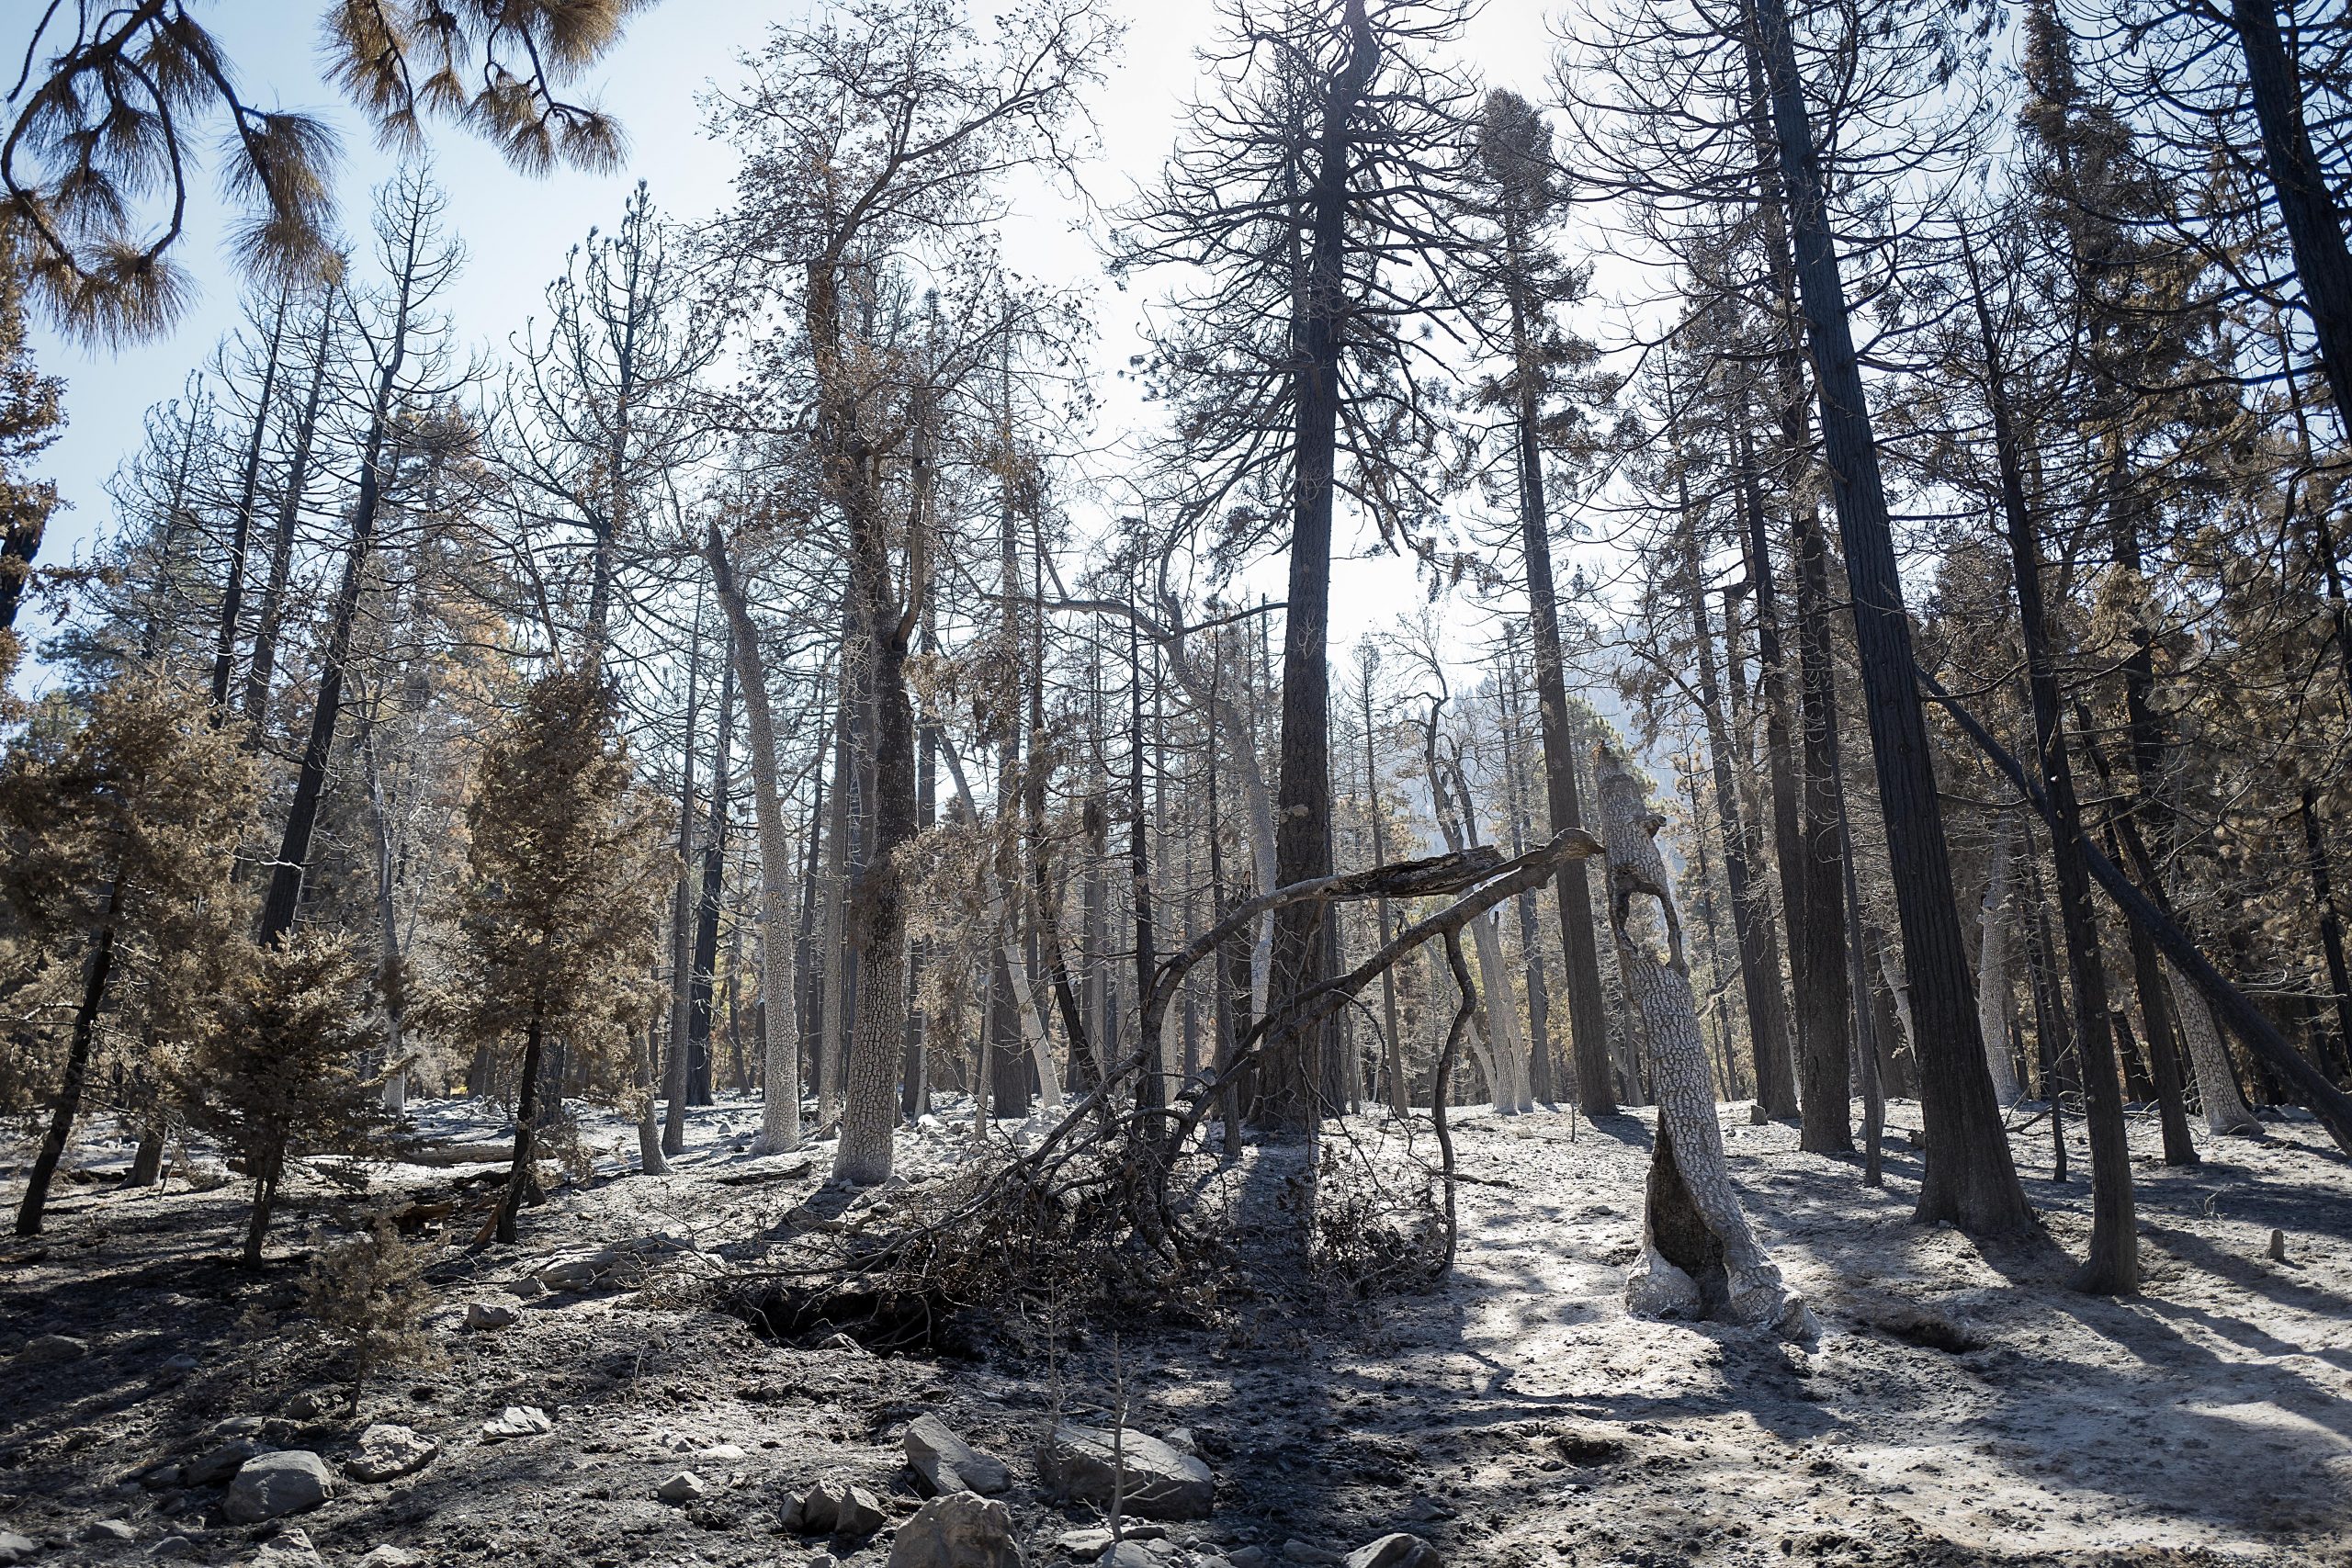 Wildfire damage in natural forest land.